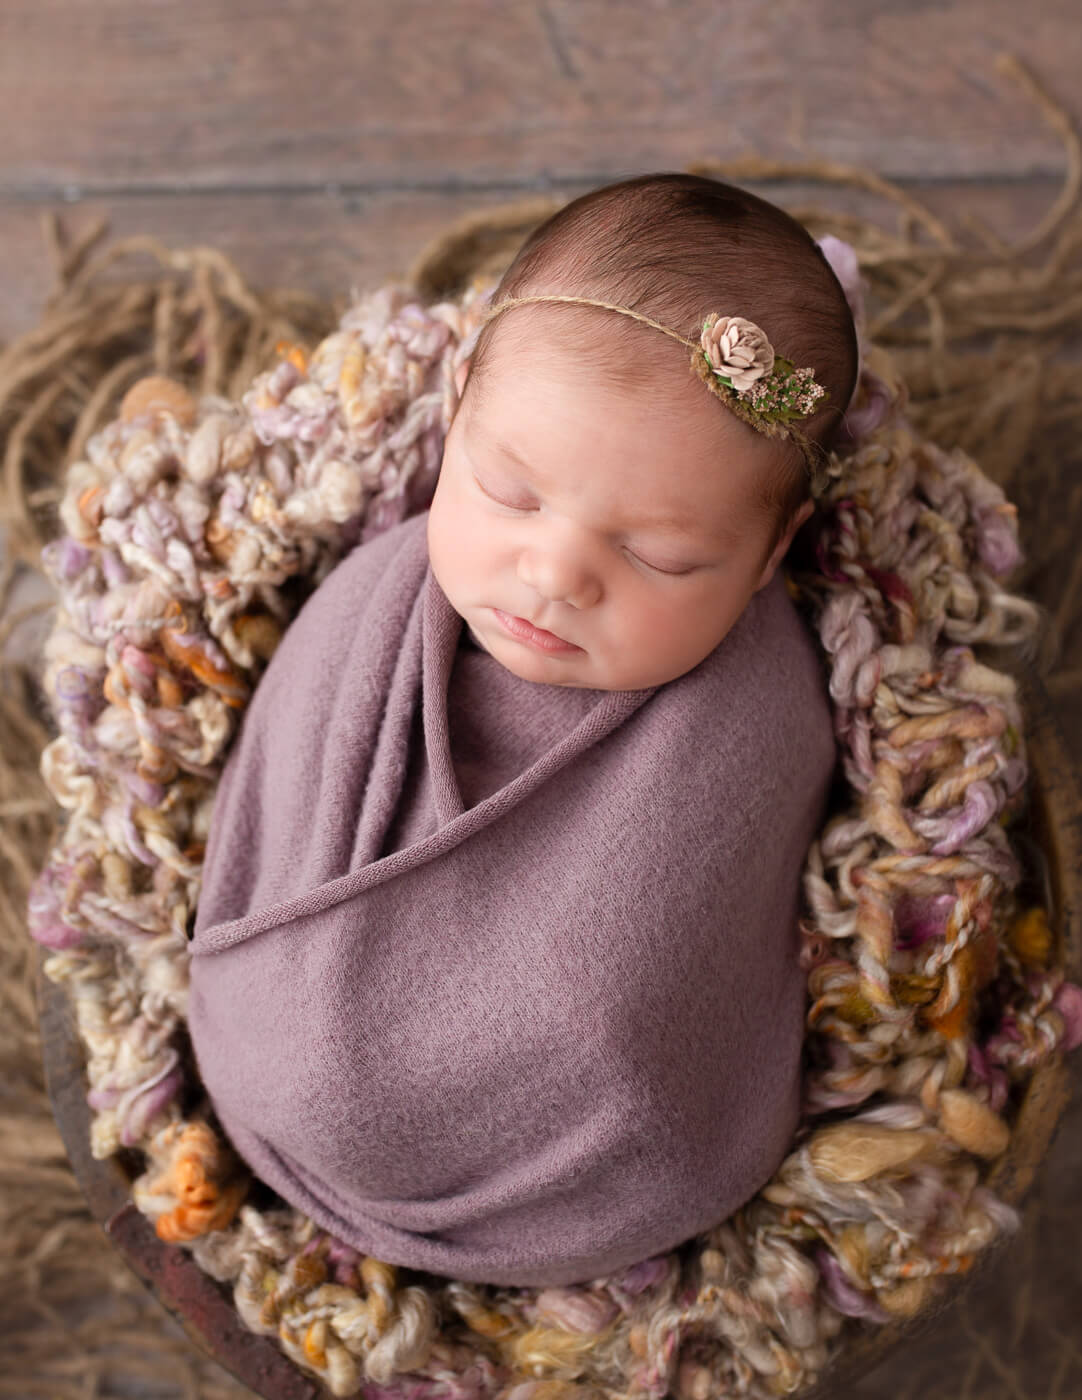 Sleepy newborn wrapped in our Rochester, NY studio.